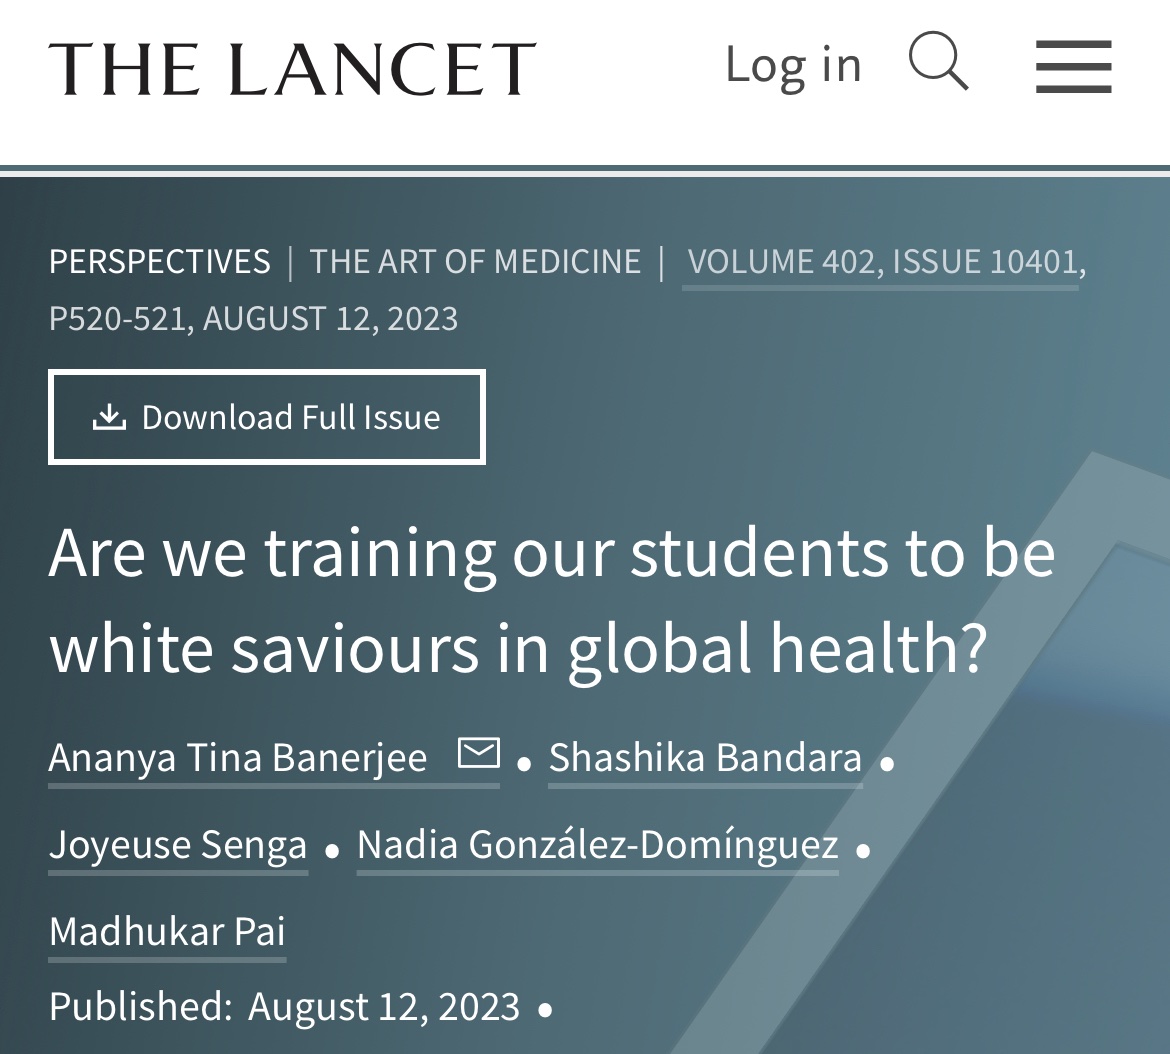 Grateful to @Harvard @DukeU and the @TheLancet for giving me the platform to speak the uncomfortable truth & push for justice in higher education with the support of my incredible colleagues @shashikaLB @paimadhu @JoyeuseSenga & nadia Gonzalez. thelancet.com/journals/lance…